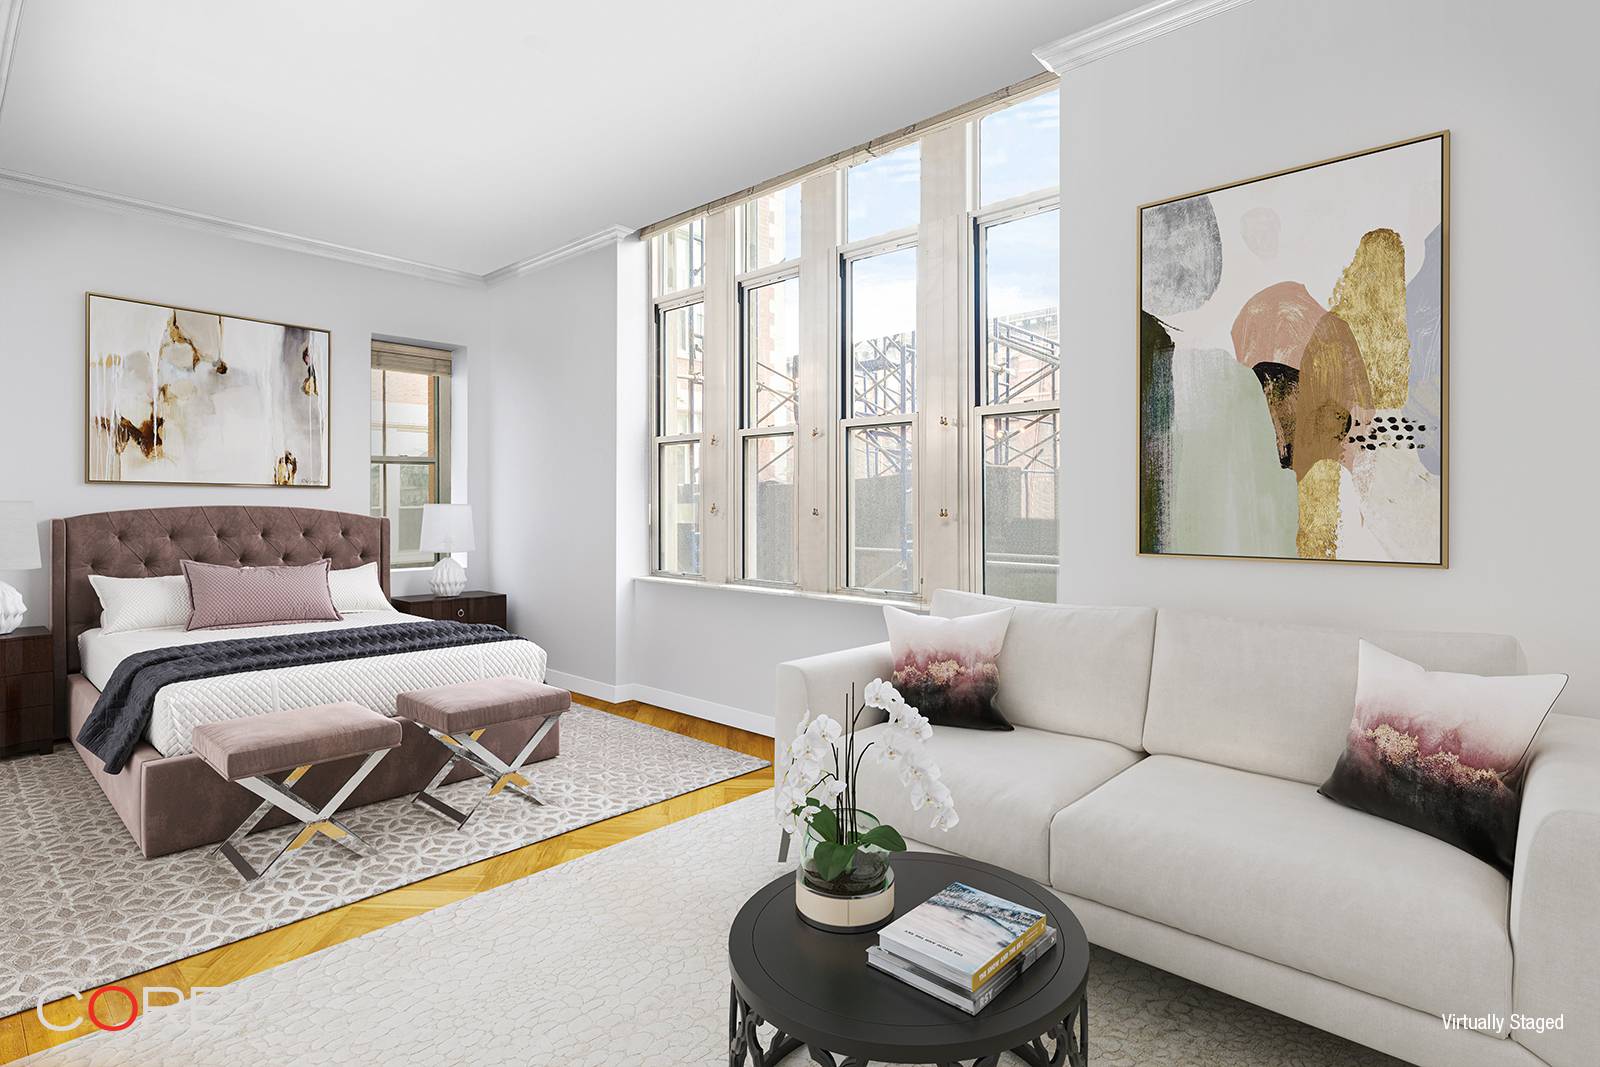 Converted in 2010 into 75 luxury residences, PS90 Condominium quickly became one of Harlem's most sought after addresses, winning the prestigious Lucy G.